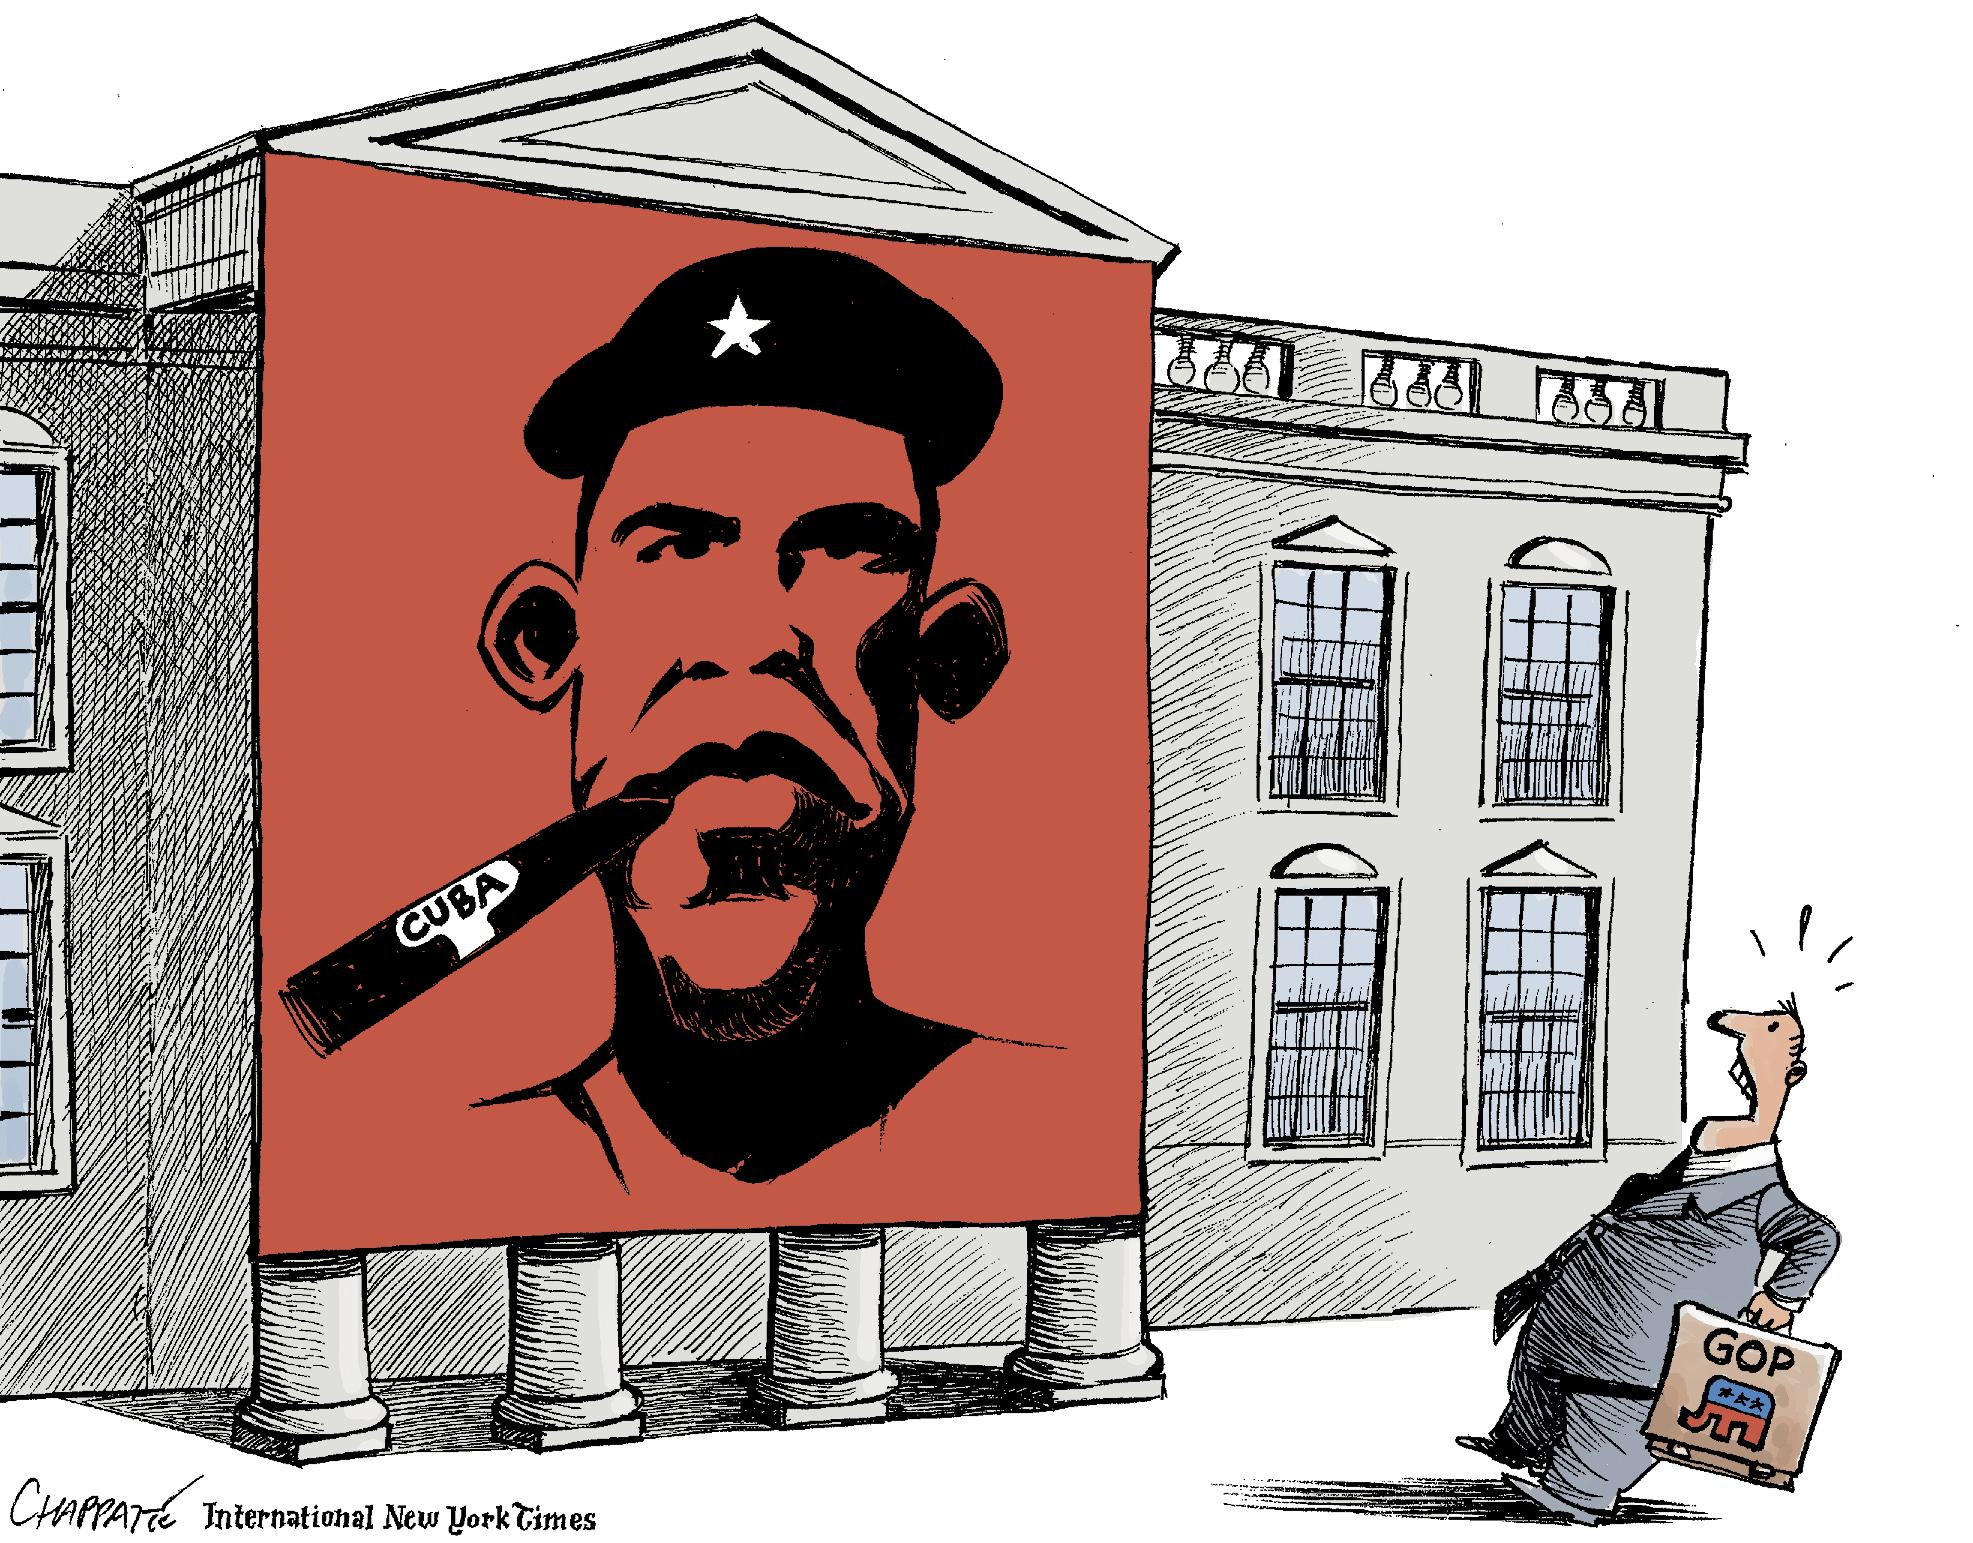 Obama opens up to Cuba